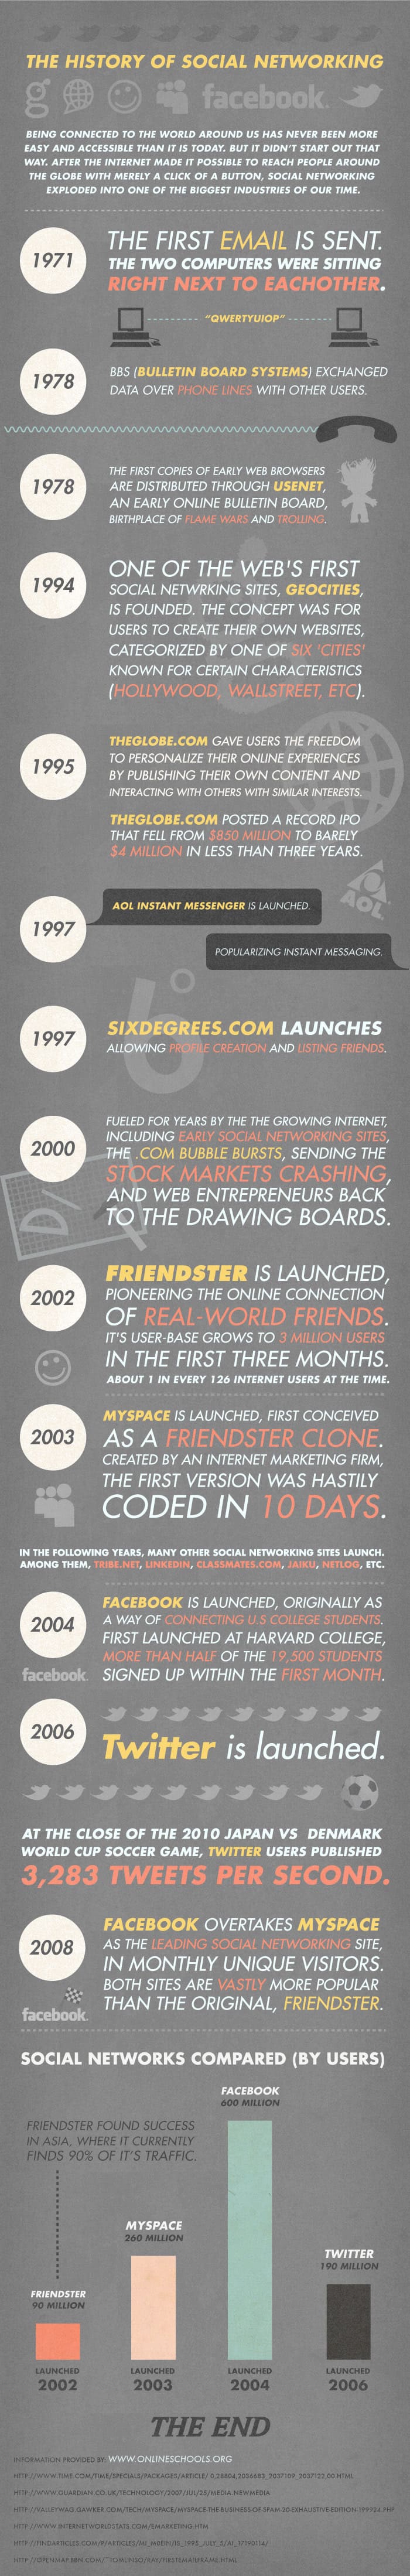 The History of the Social Network